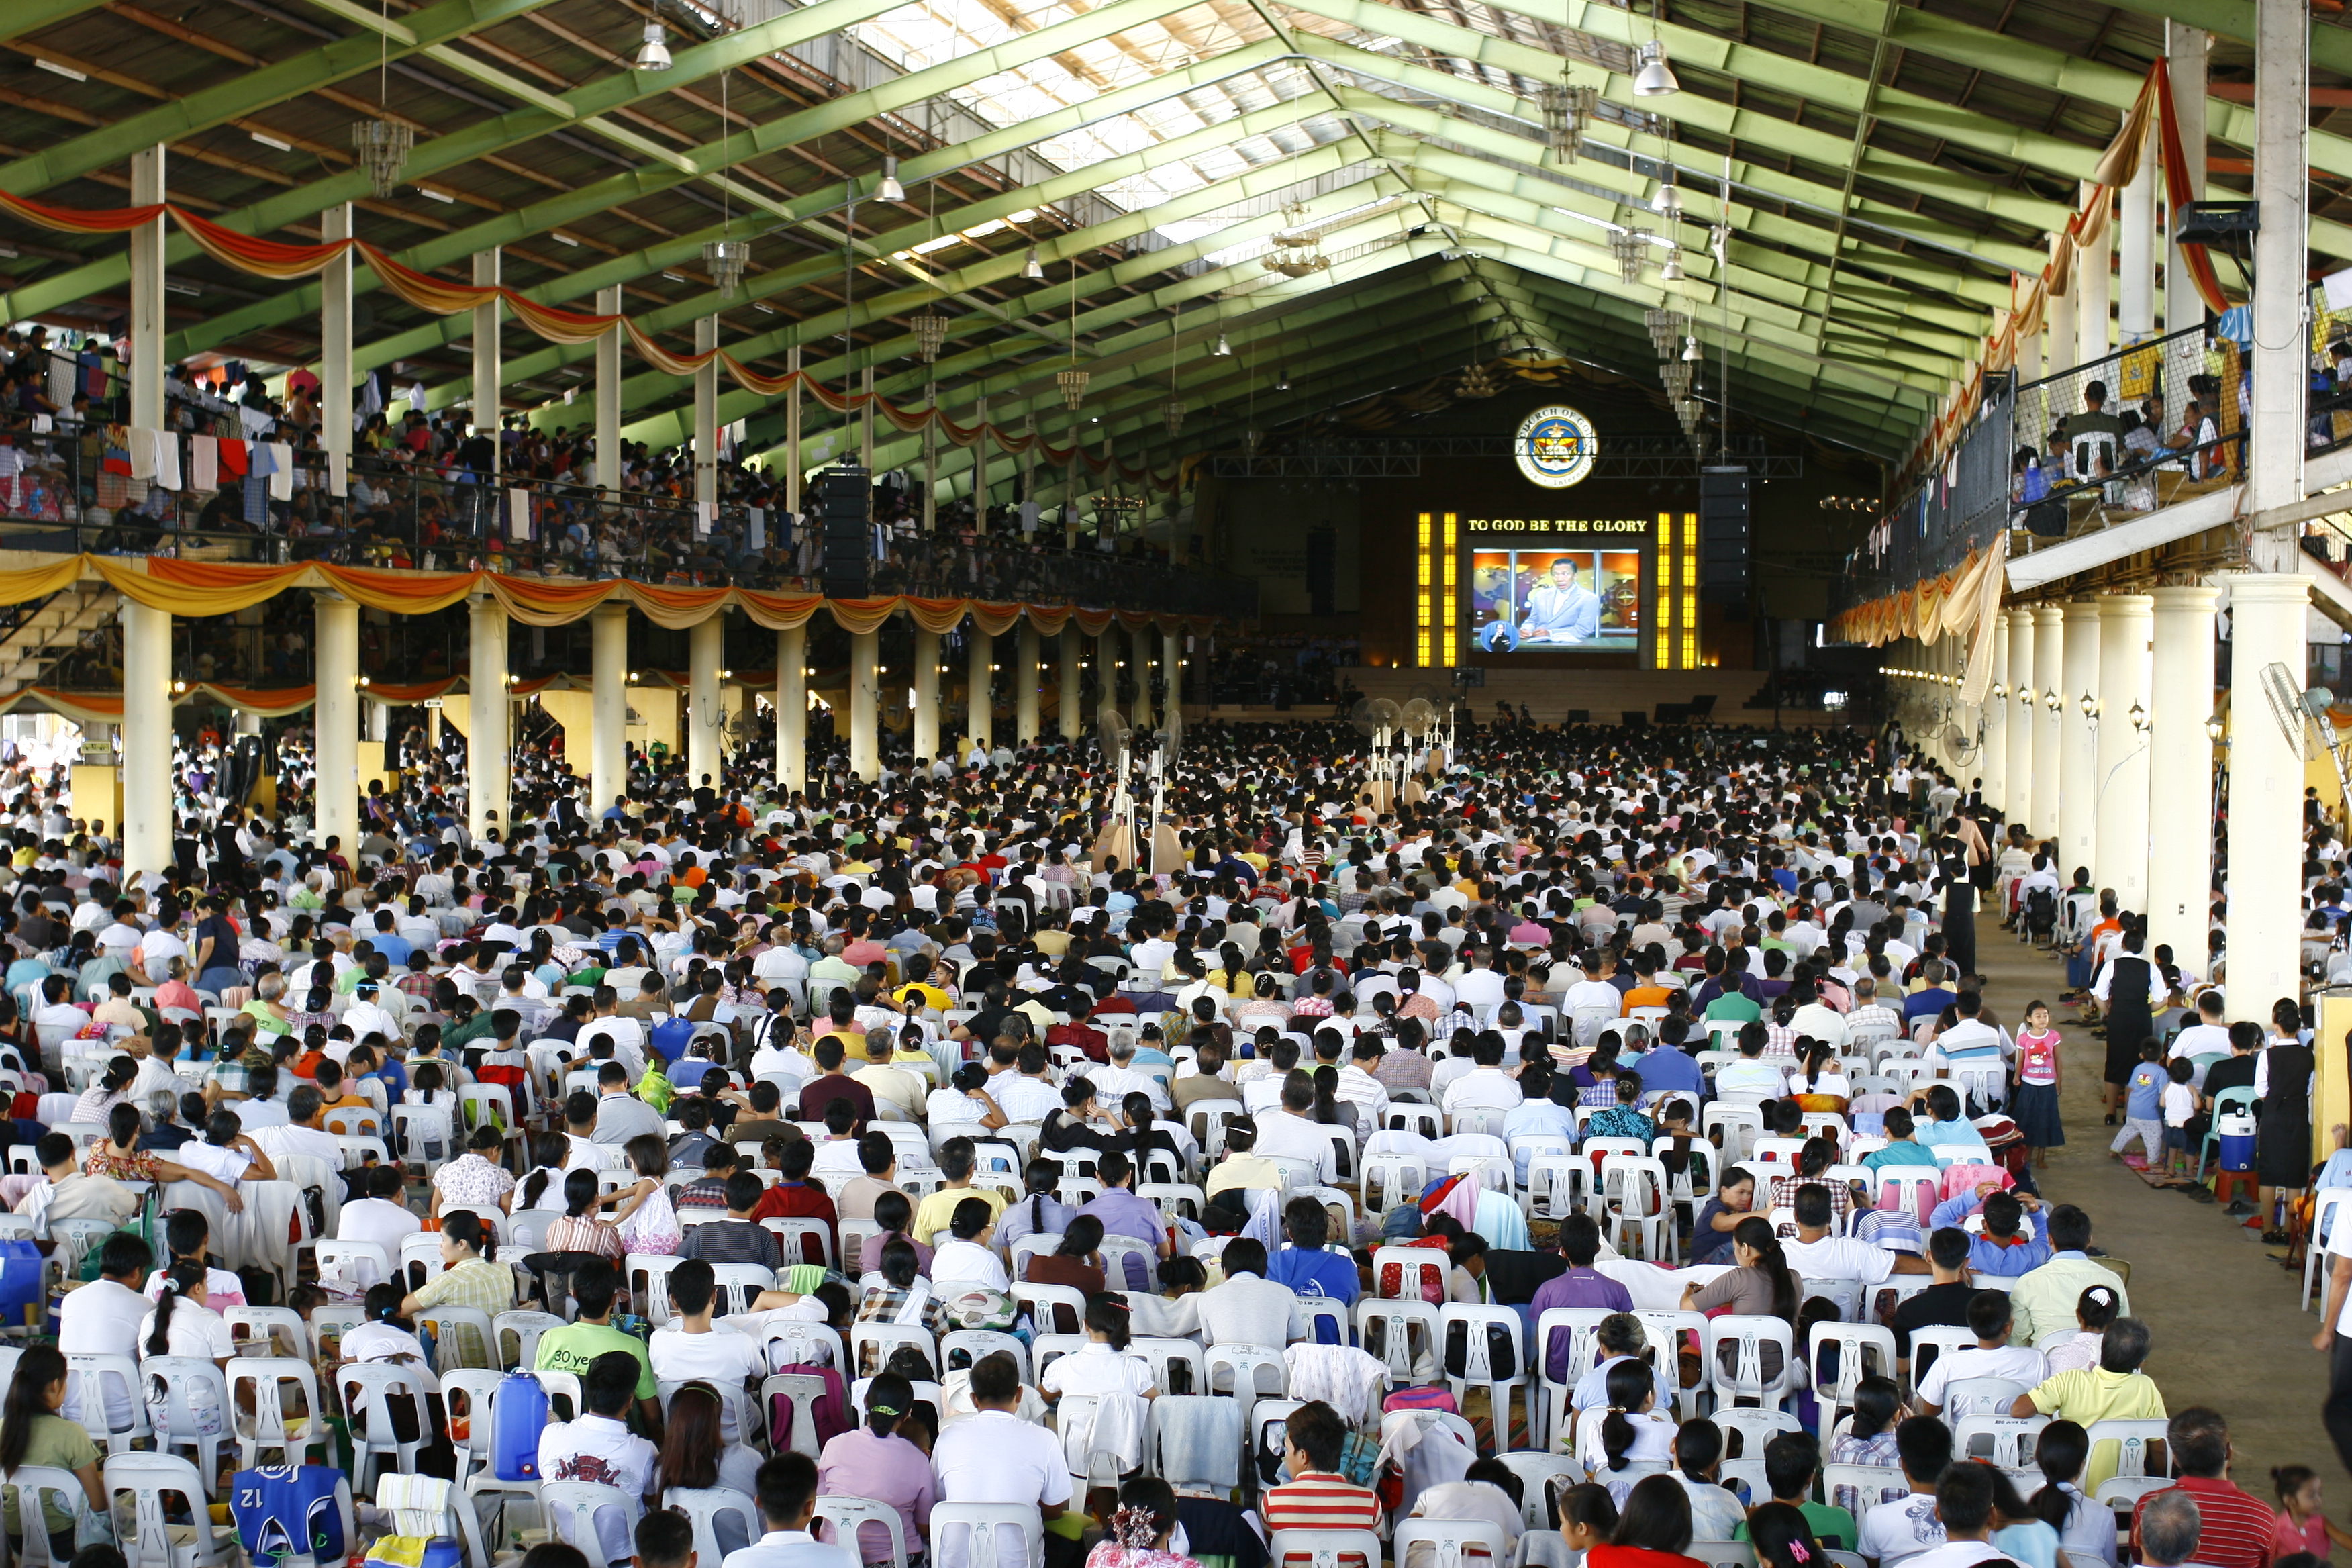 Members of the Church of God in Manila and nearby provinces flocked to the ADD Convention Center in Apalit, Pampanga for the three-day event.